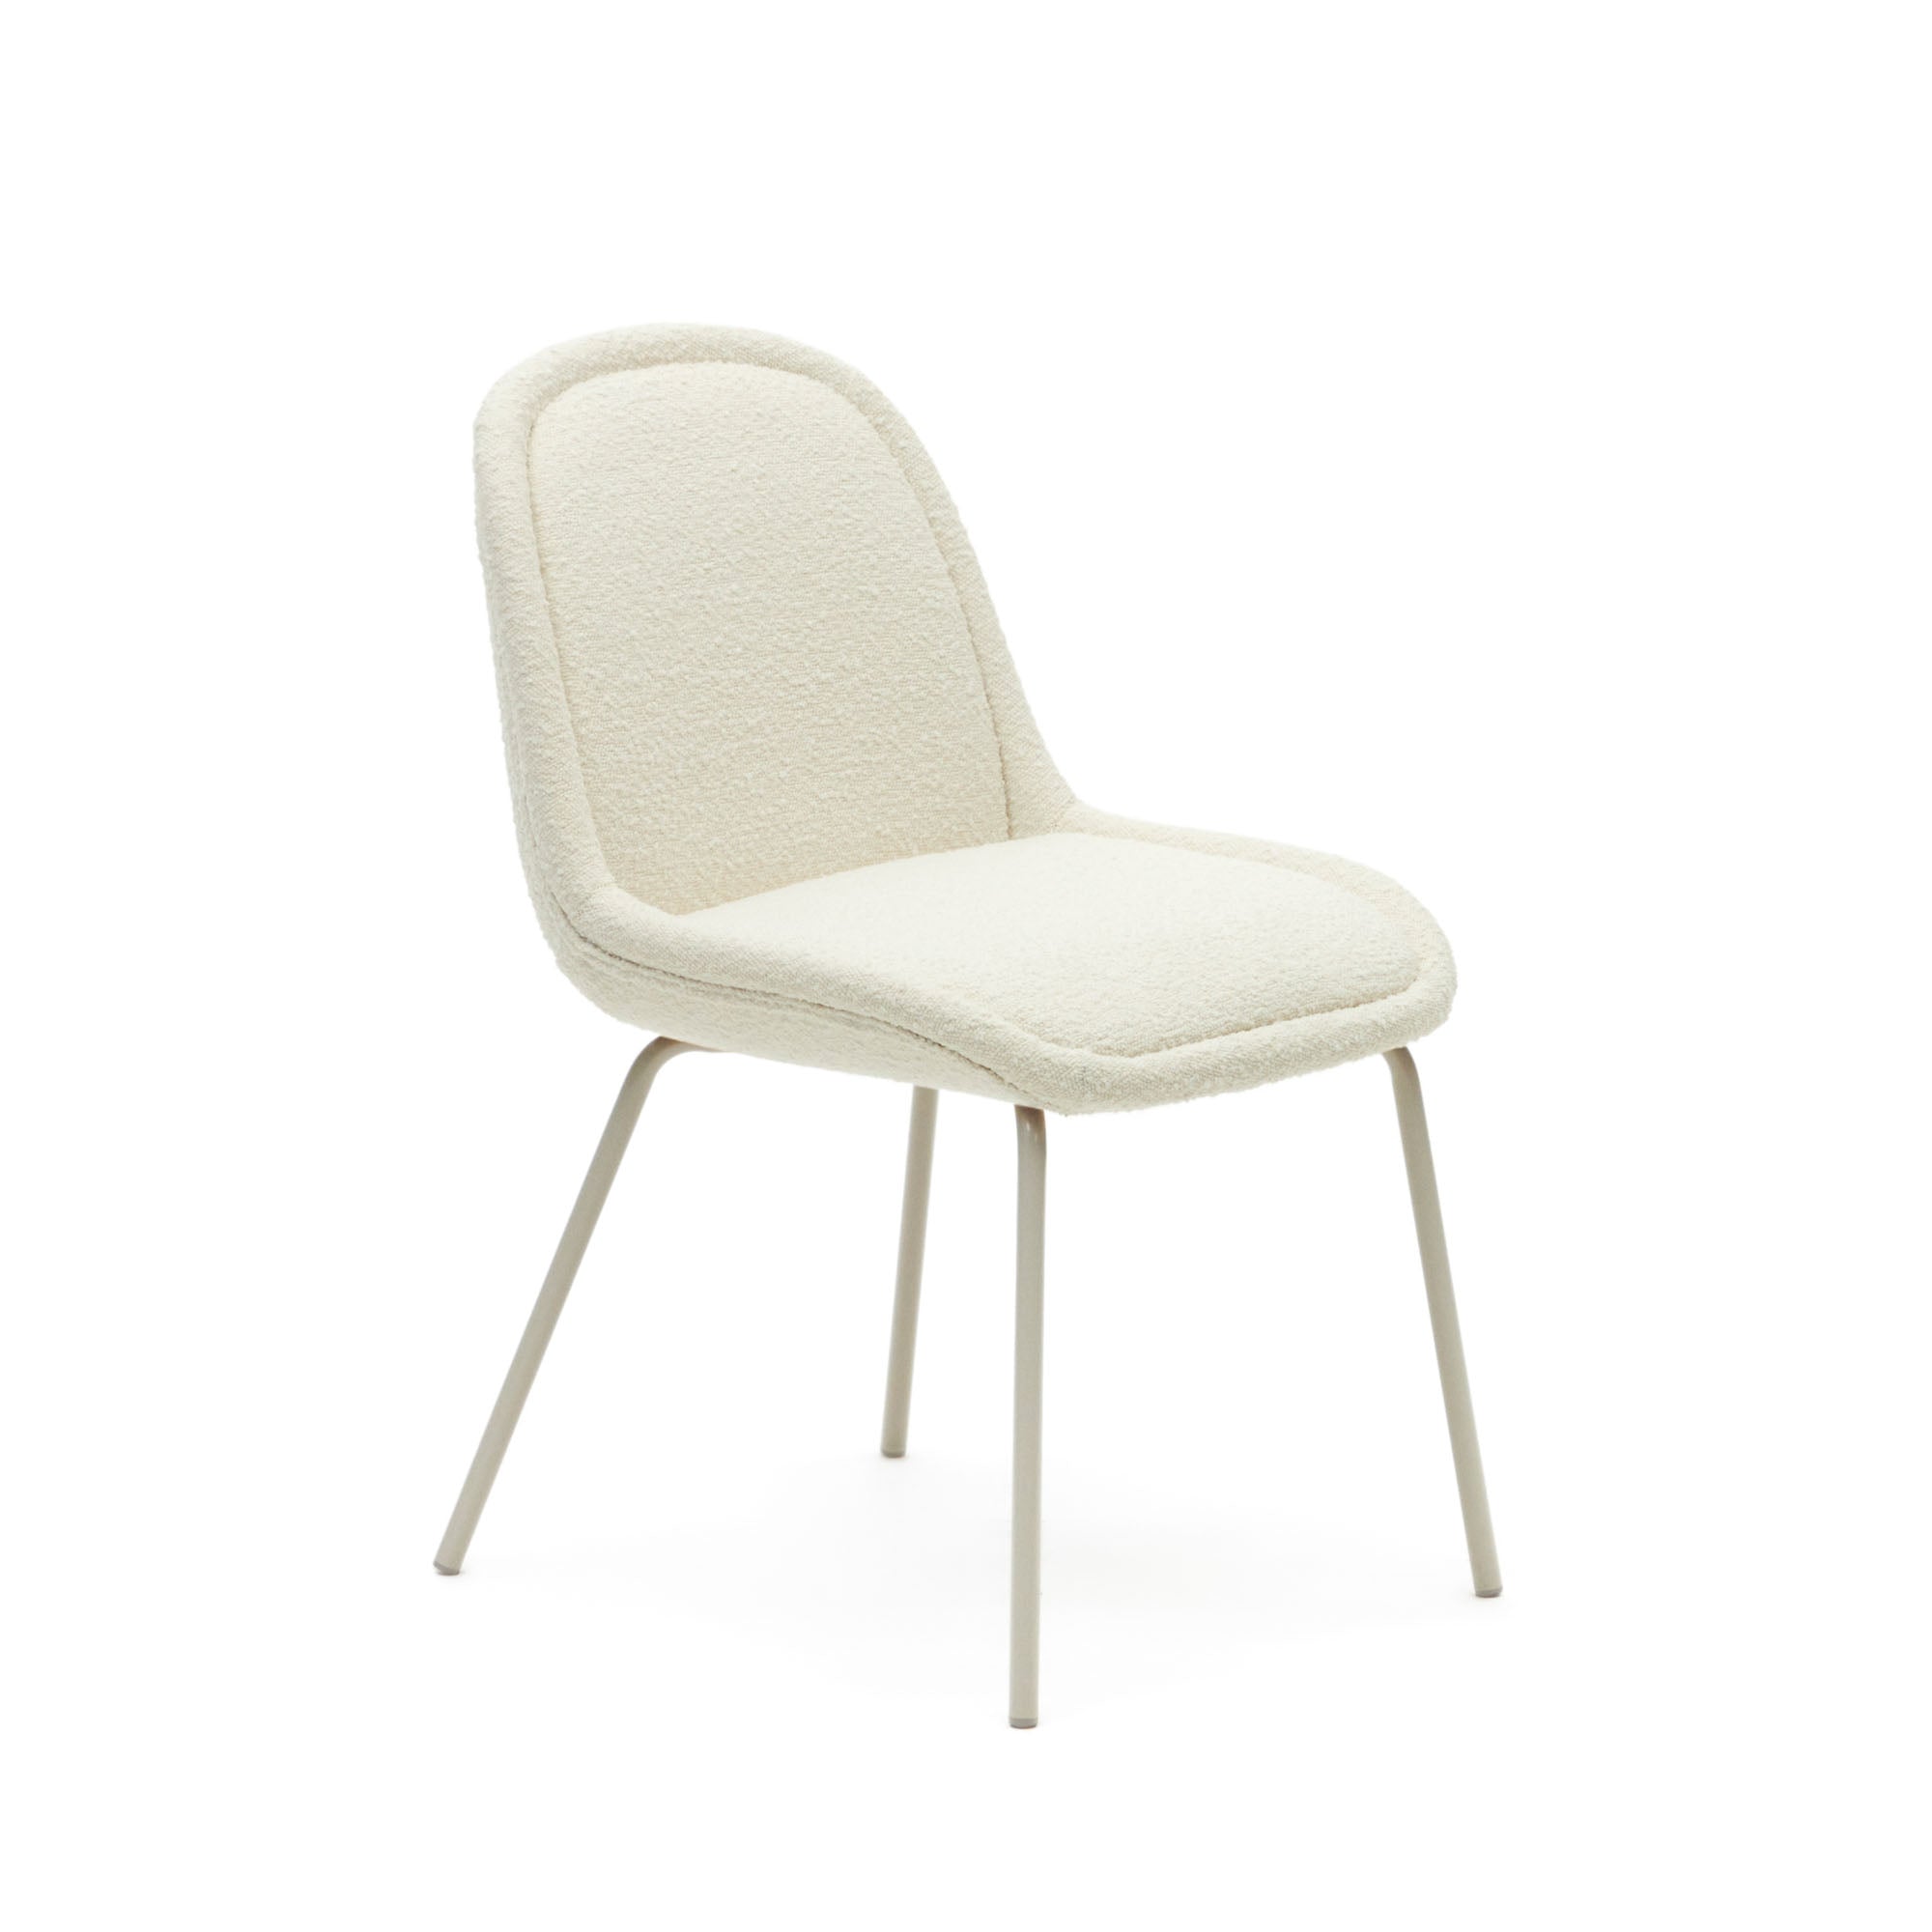 Aimin chair in white fleece and steel legs with a matte beige painted finish